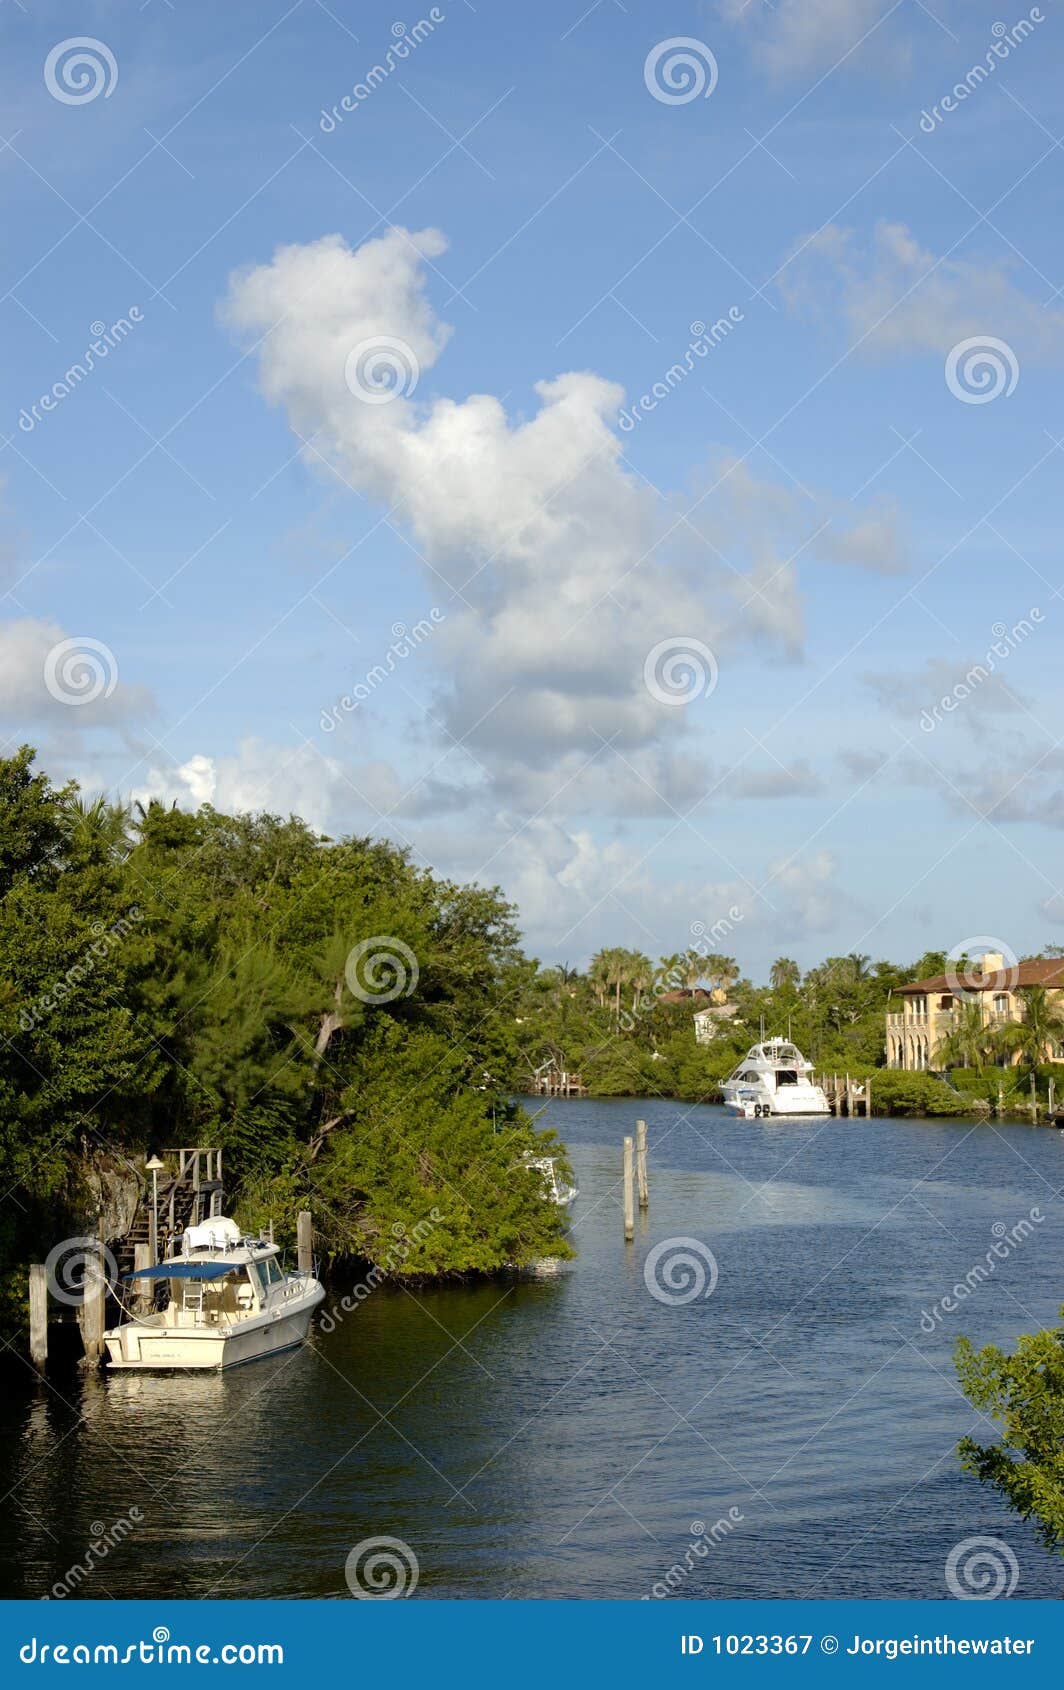 coral gables canal